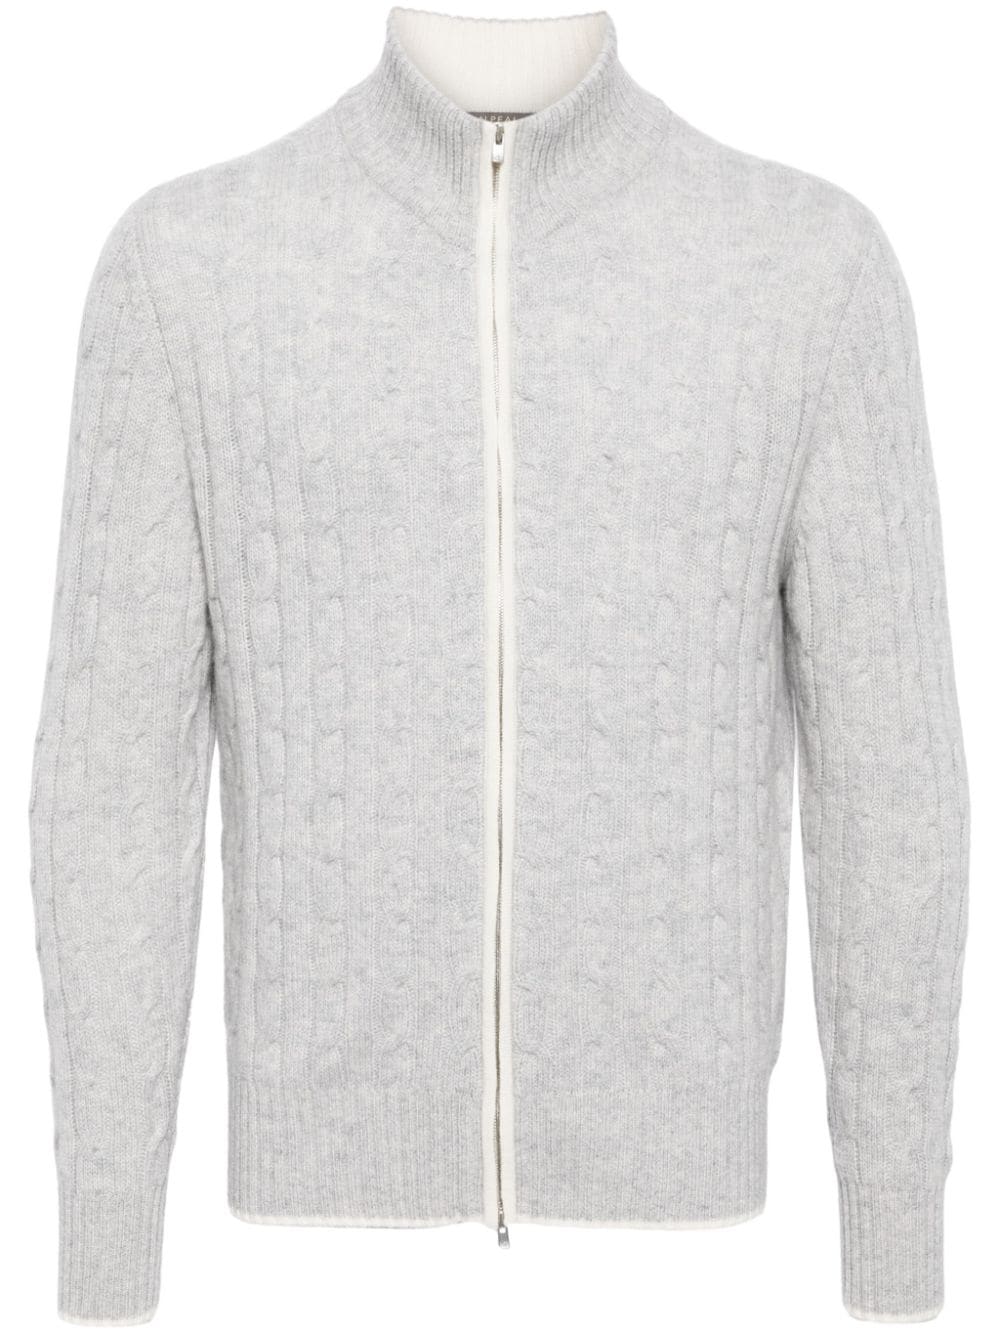 N.Peal cable-knit cashmere cardigan - Grey von N.Peal